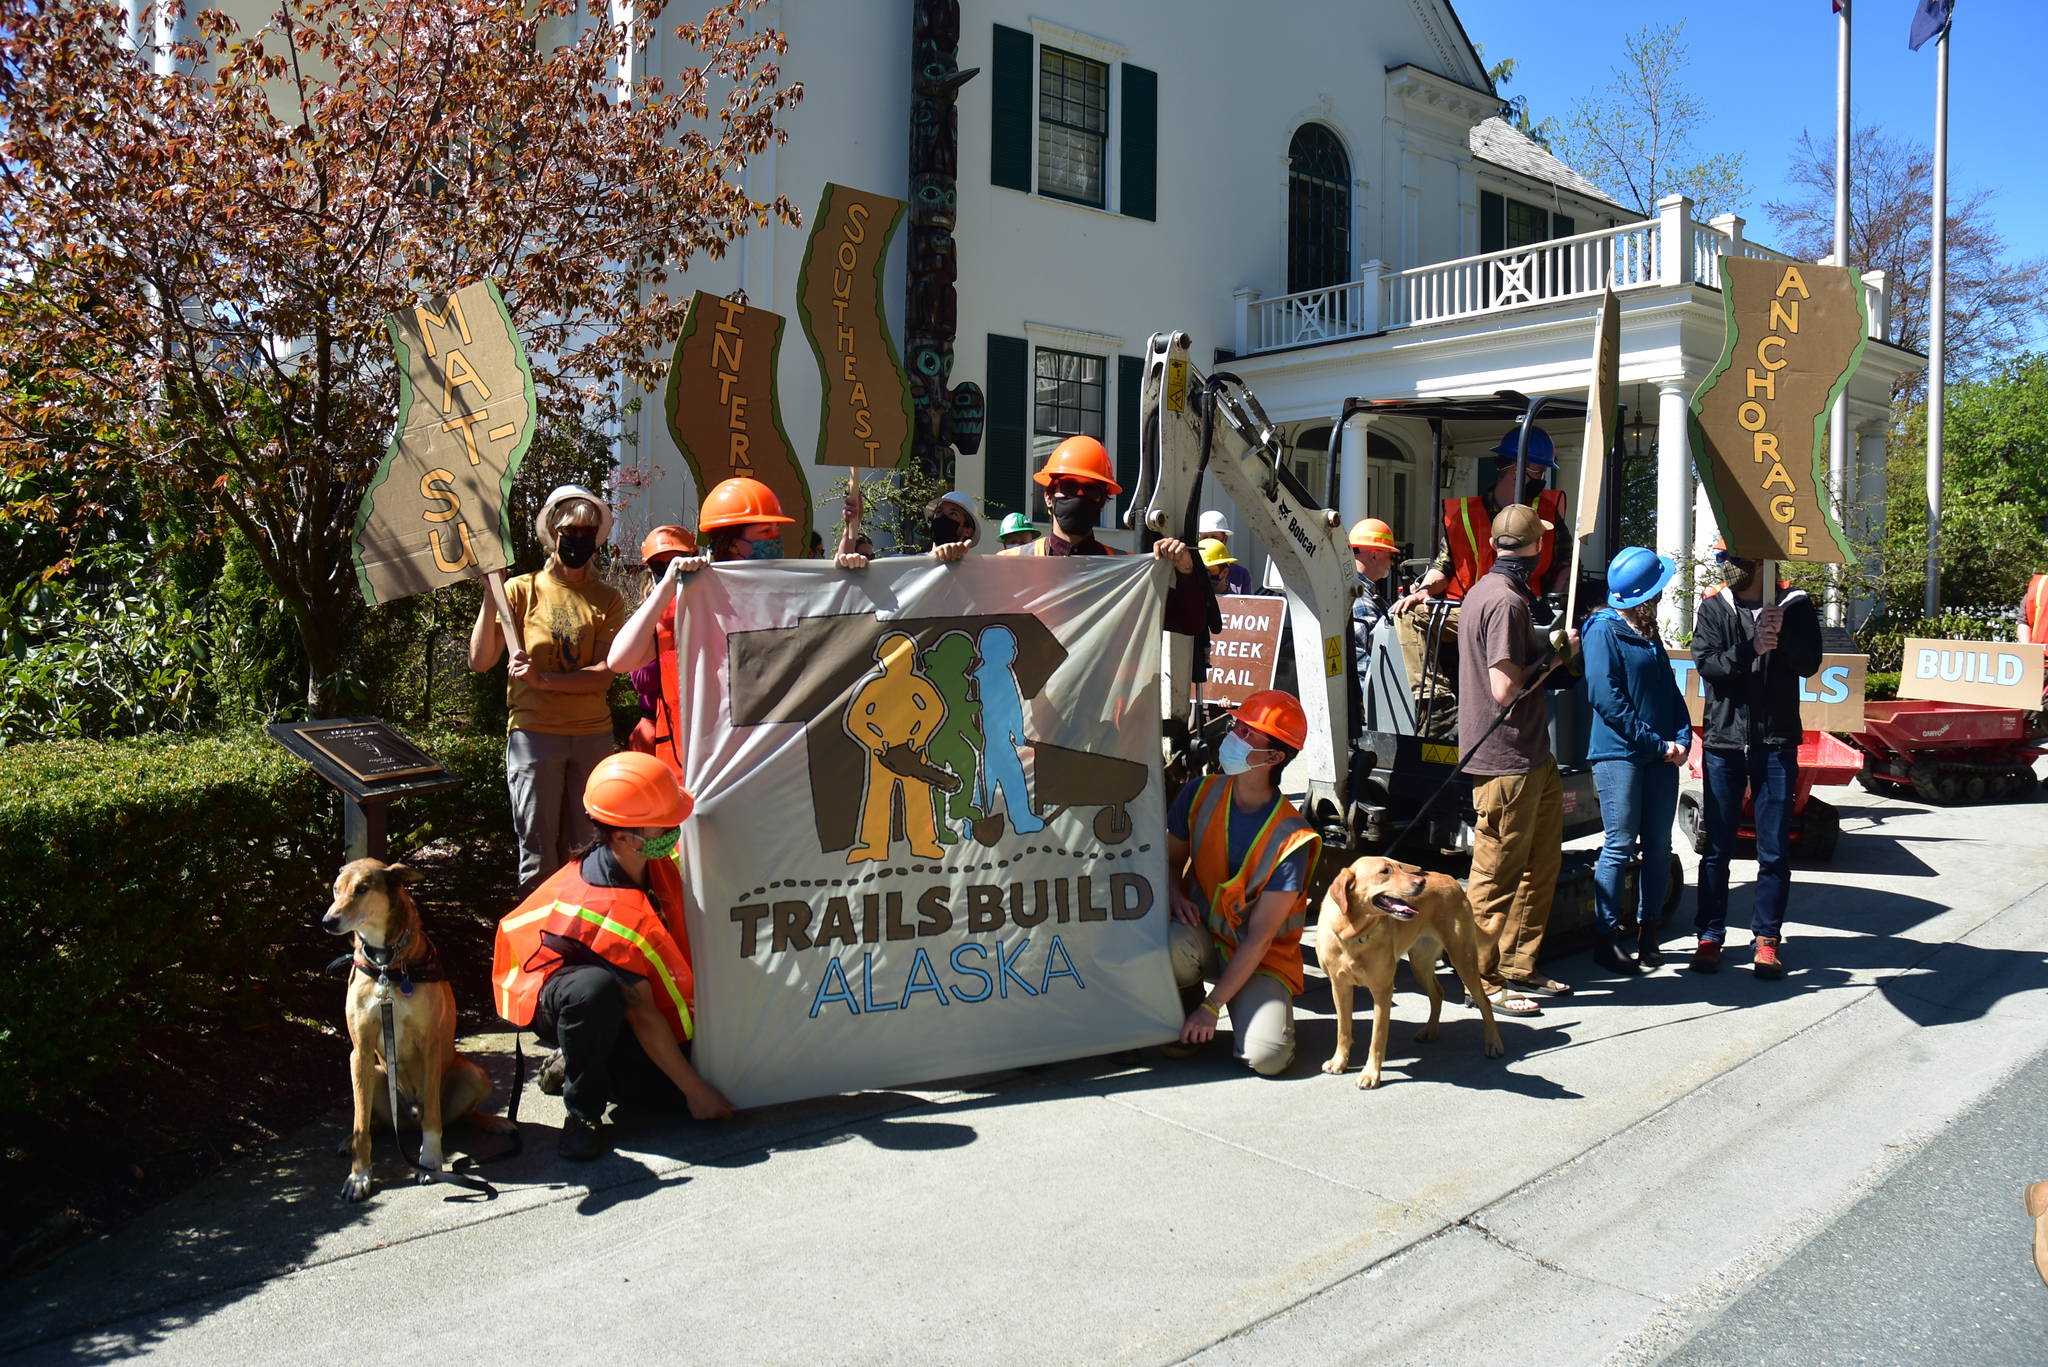 A Trails Build Alaska rally demonstration was held in Juneau on Wednesday, May 19. (Peter Segall / Juneau Empire)